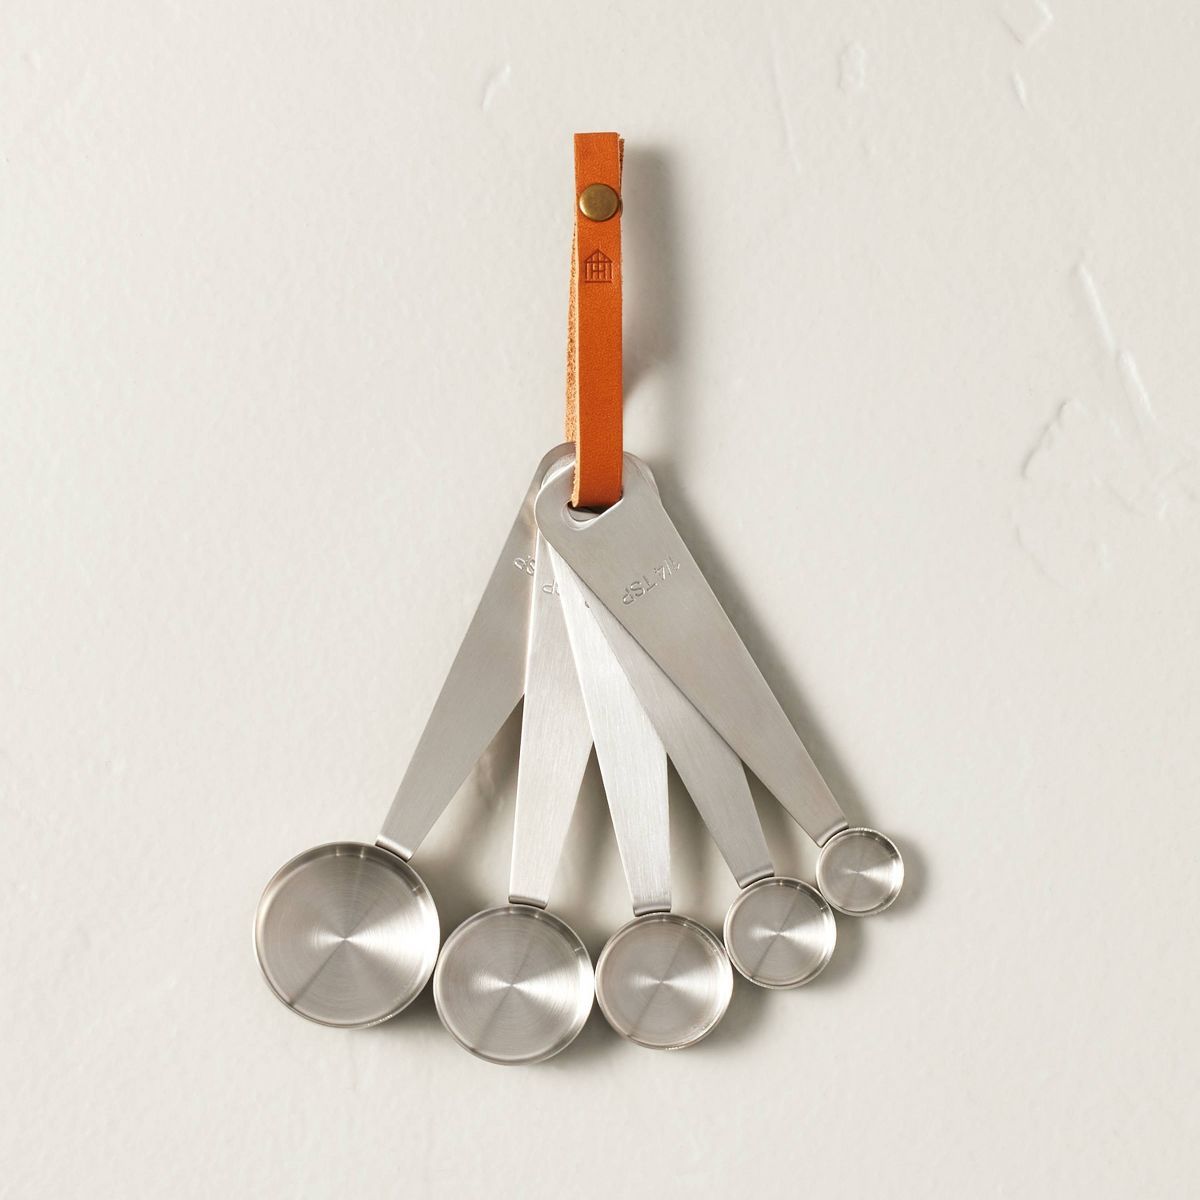 5pc Measuring Spoon Set Vintage Silver Finish - Hearth & Hand™ with Magnolia | Target